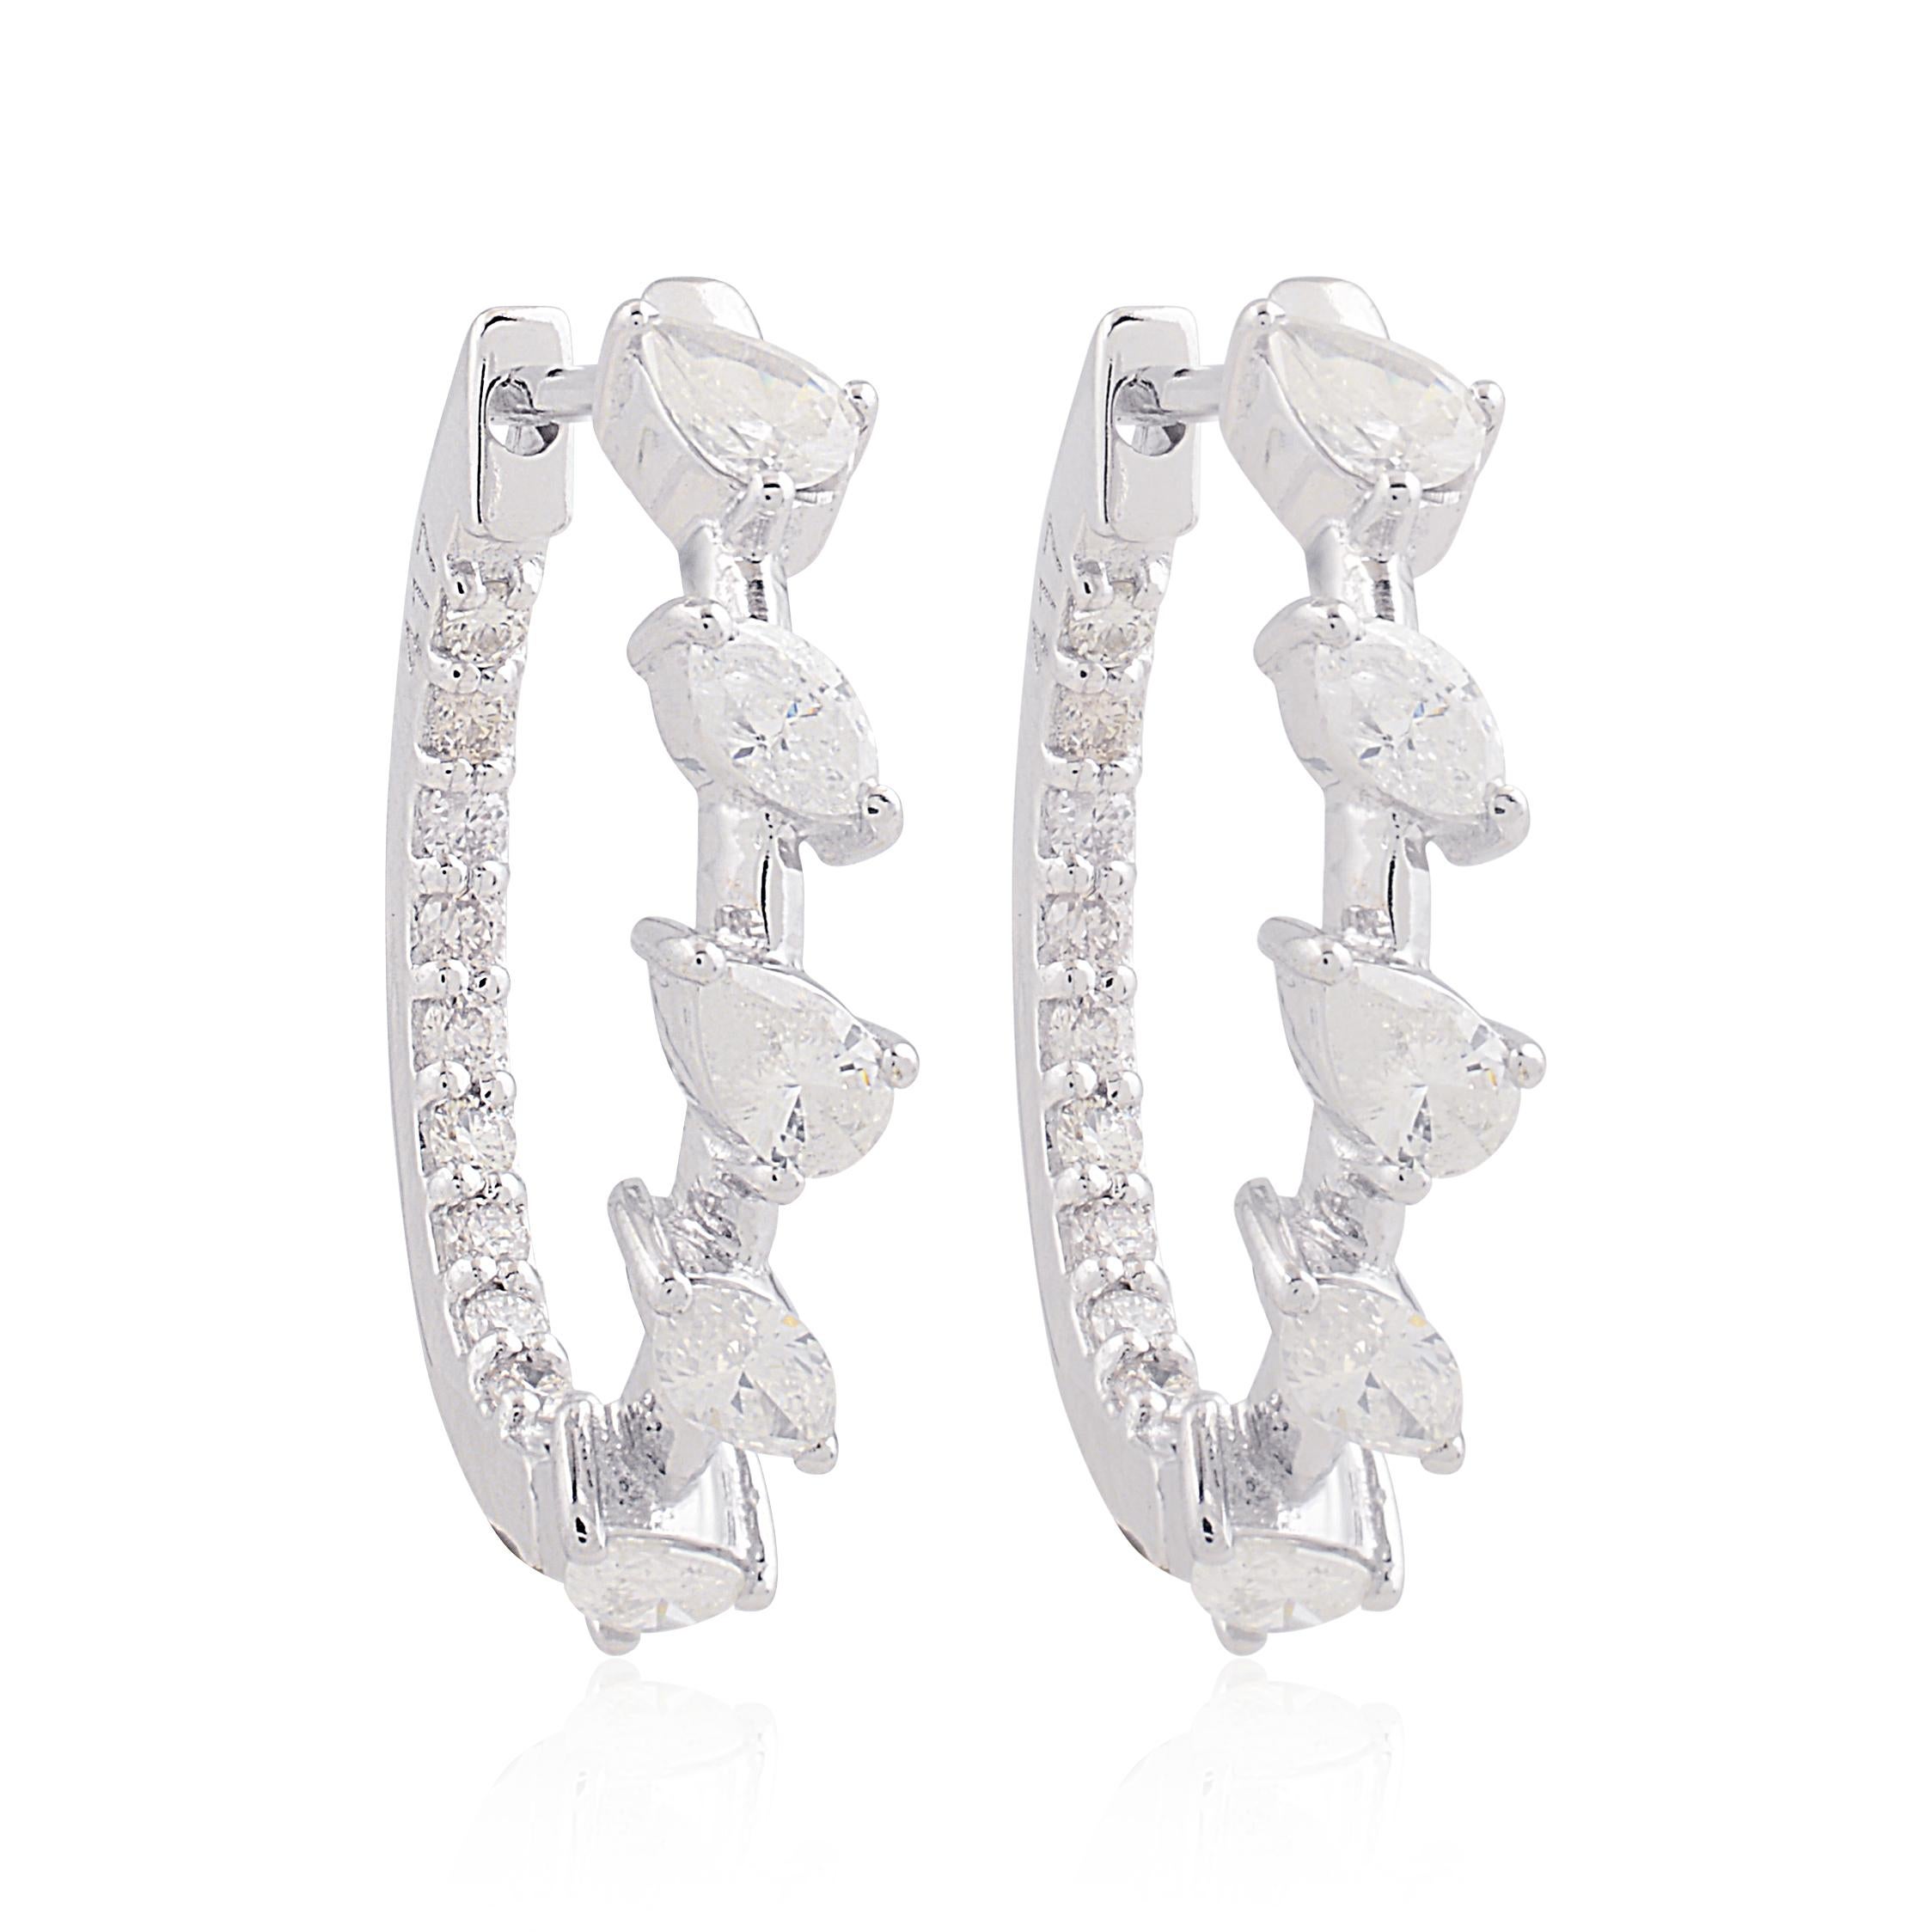 Adorn yourself with the exquisite brilliance of these 1.18 Carat Diamond Pave Huggies Hoop Earrings, crafted in solid 10k White Gold. These earrings epitomize modern luxury and timeless elegance, making them a captivating addition to any jewelry